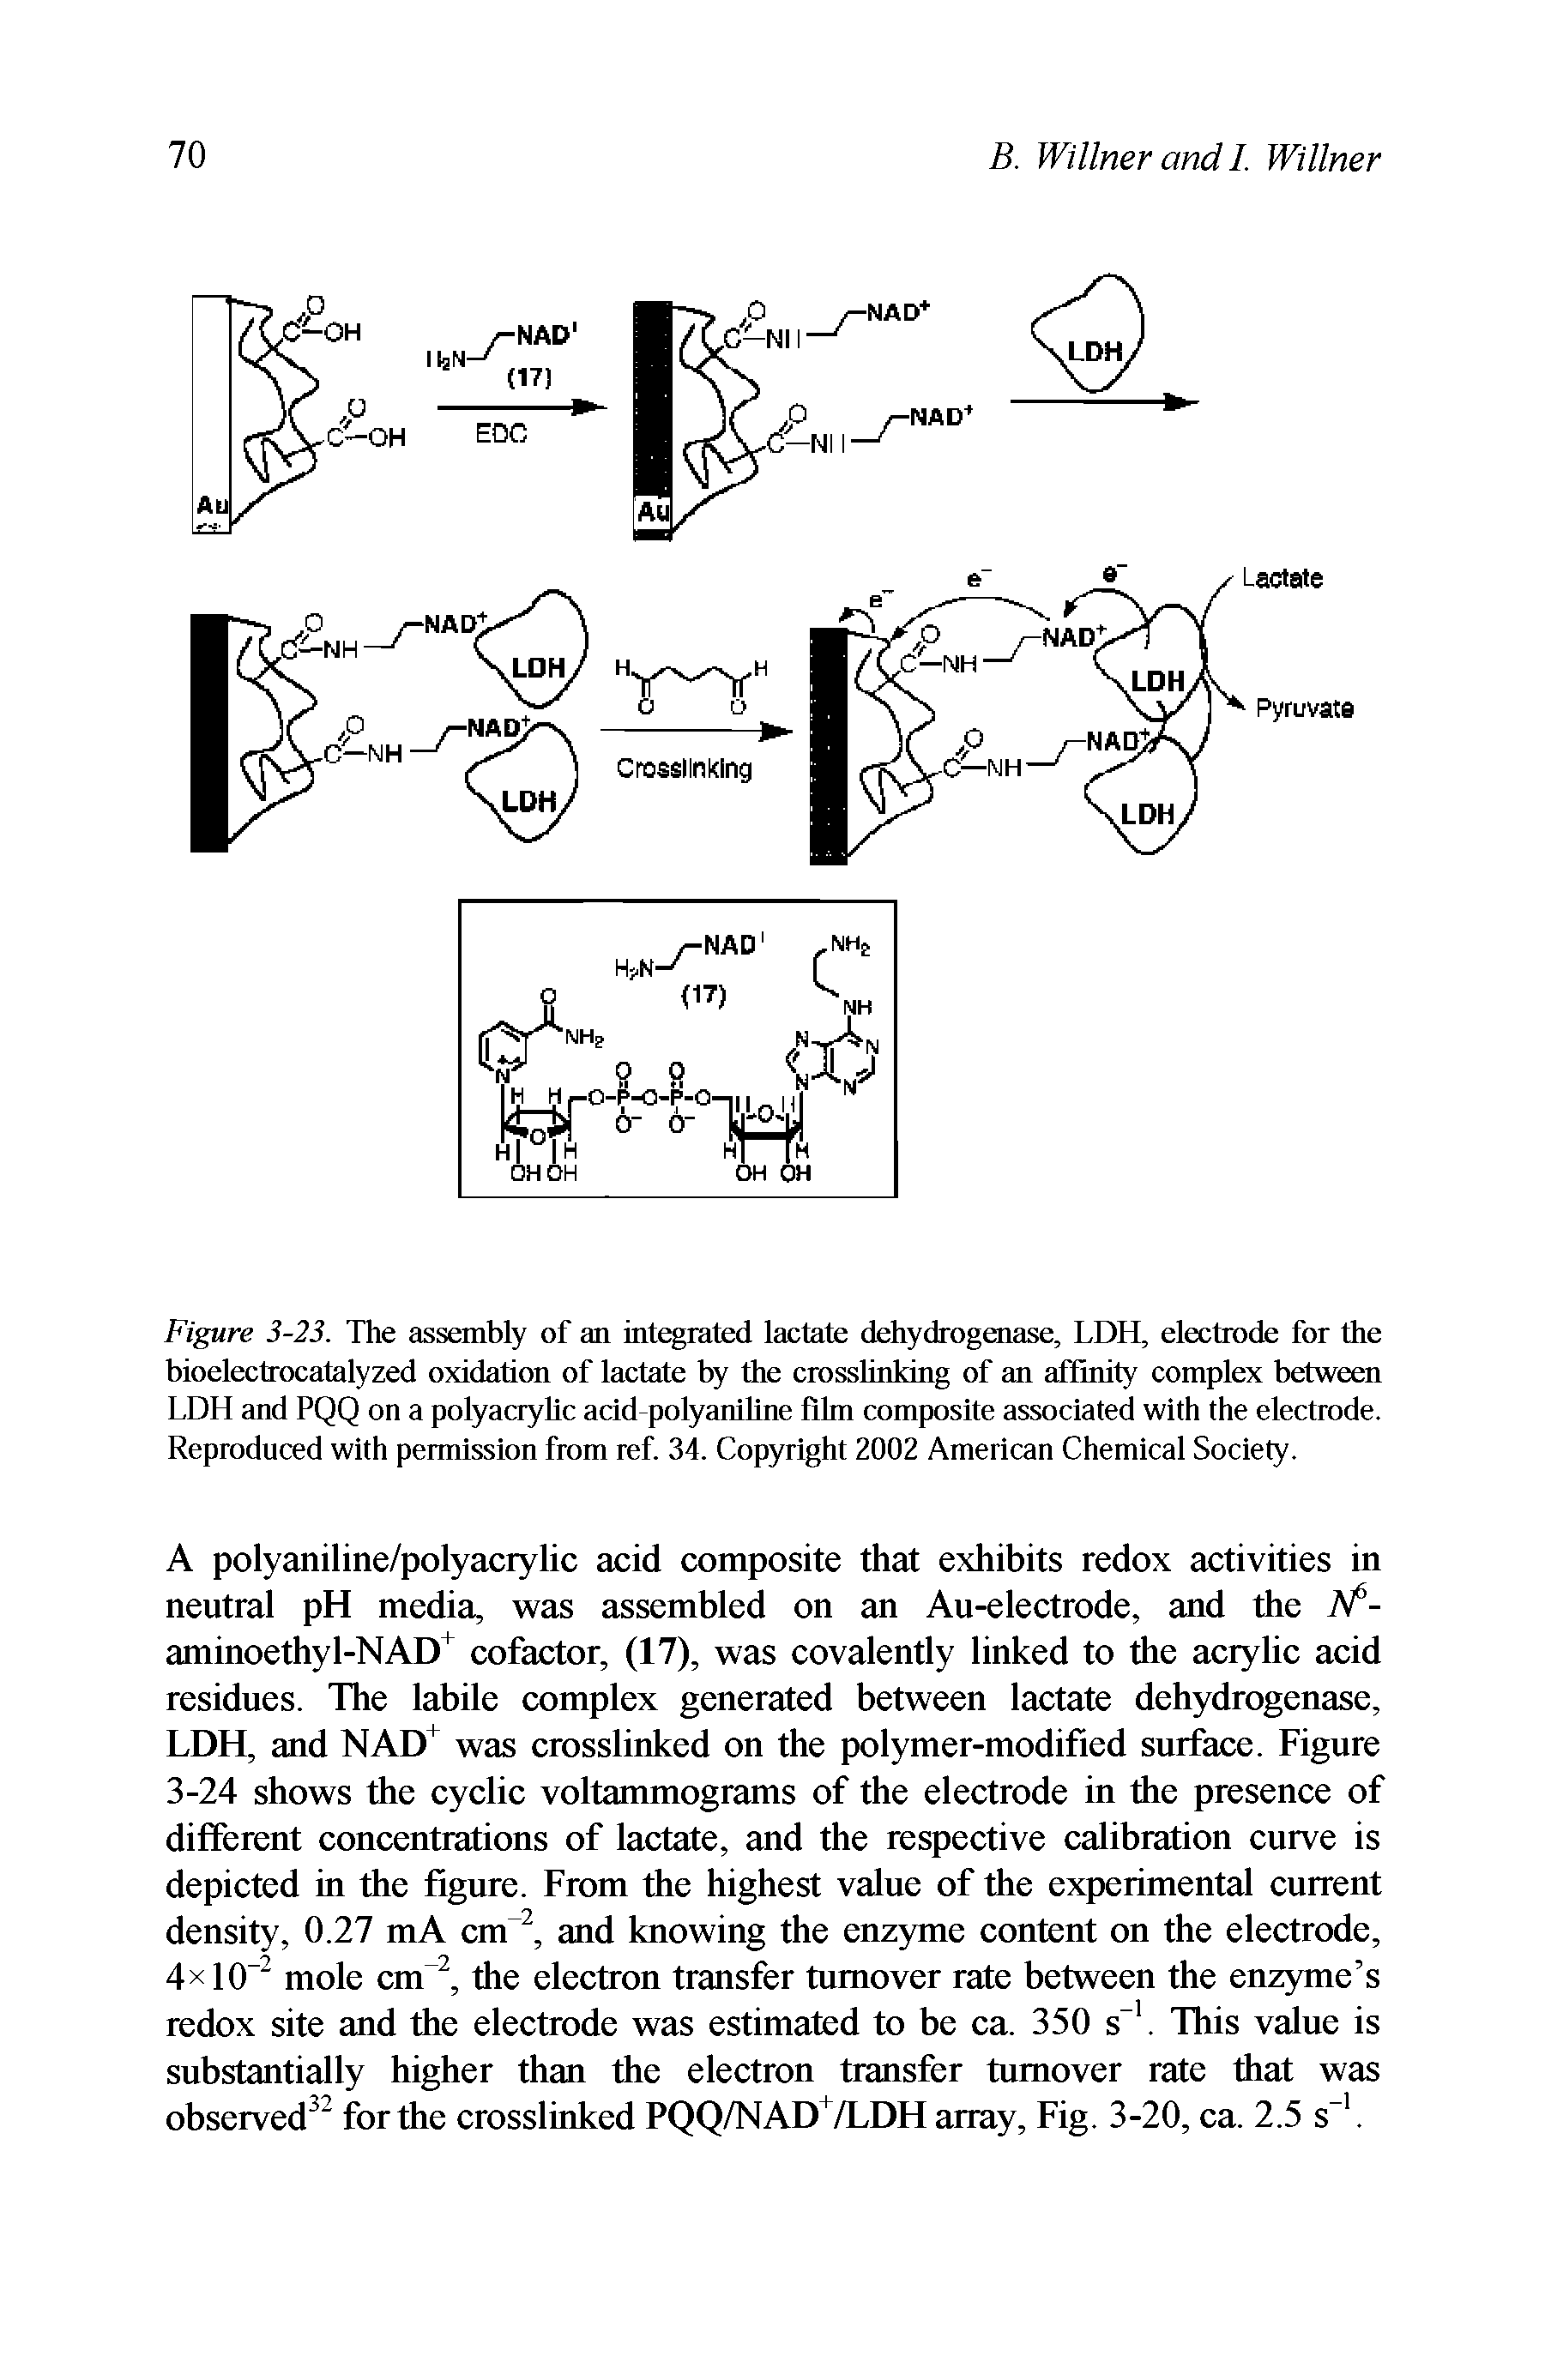 Figure 3-23. The assembly of an integrated lactate dehydrogenase, LDH, electrode for the bioelectrocatalyzed oxidation of lactate by the crosslinking of an affinity complex between LDH and PQQ on a polyacryhc acid polyaniline lihn composite associated with the electrode. Reproduced with permission from ref. 34. Copyright 2002 American Chemical Society.